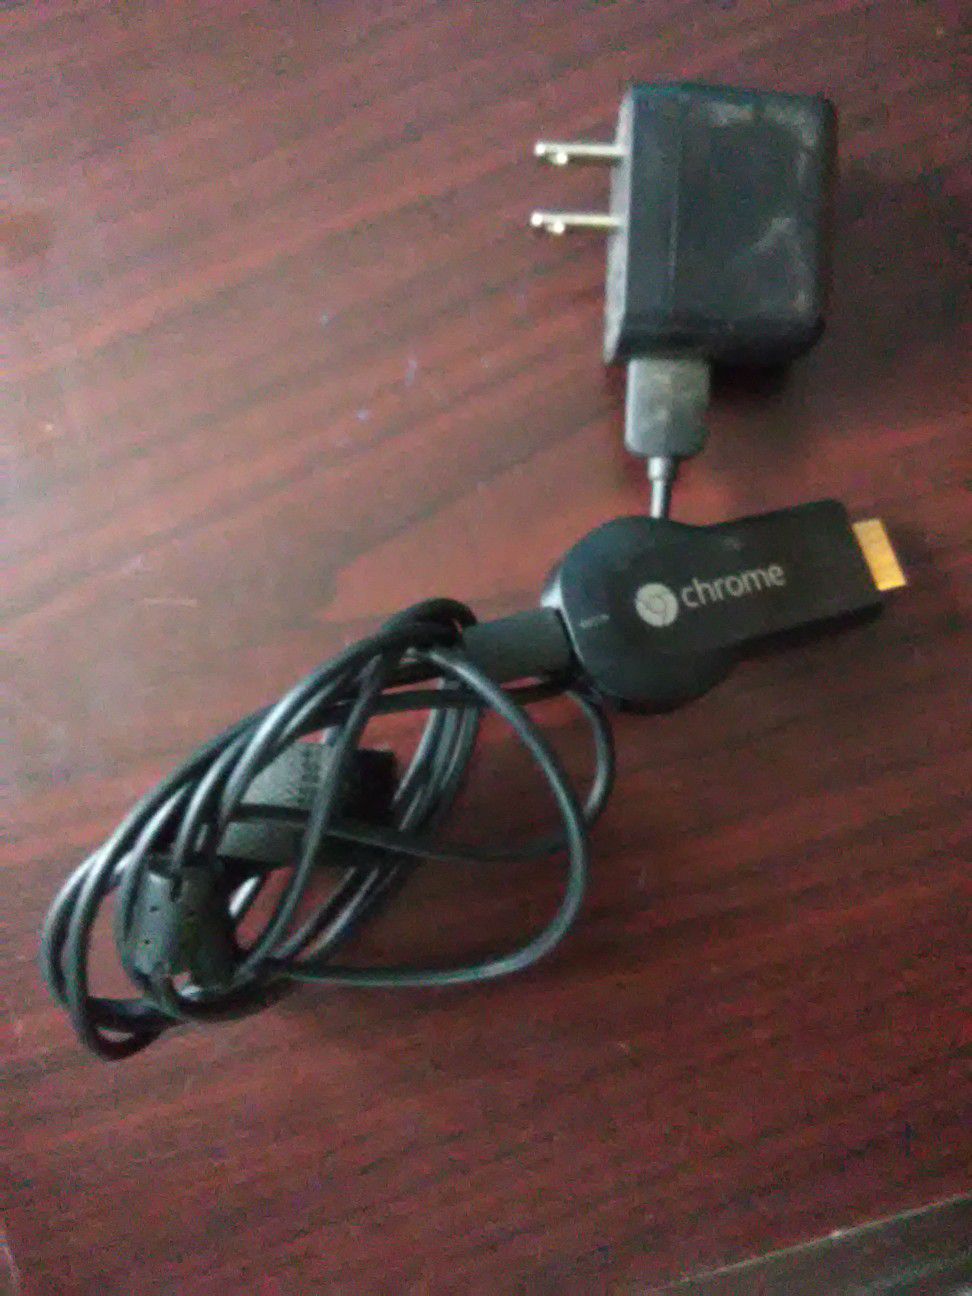 Google Chromecast with charger $25